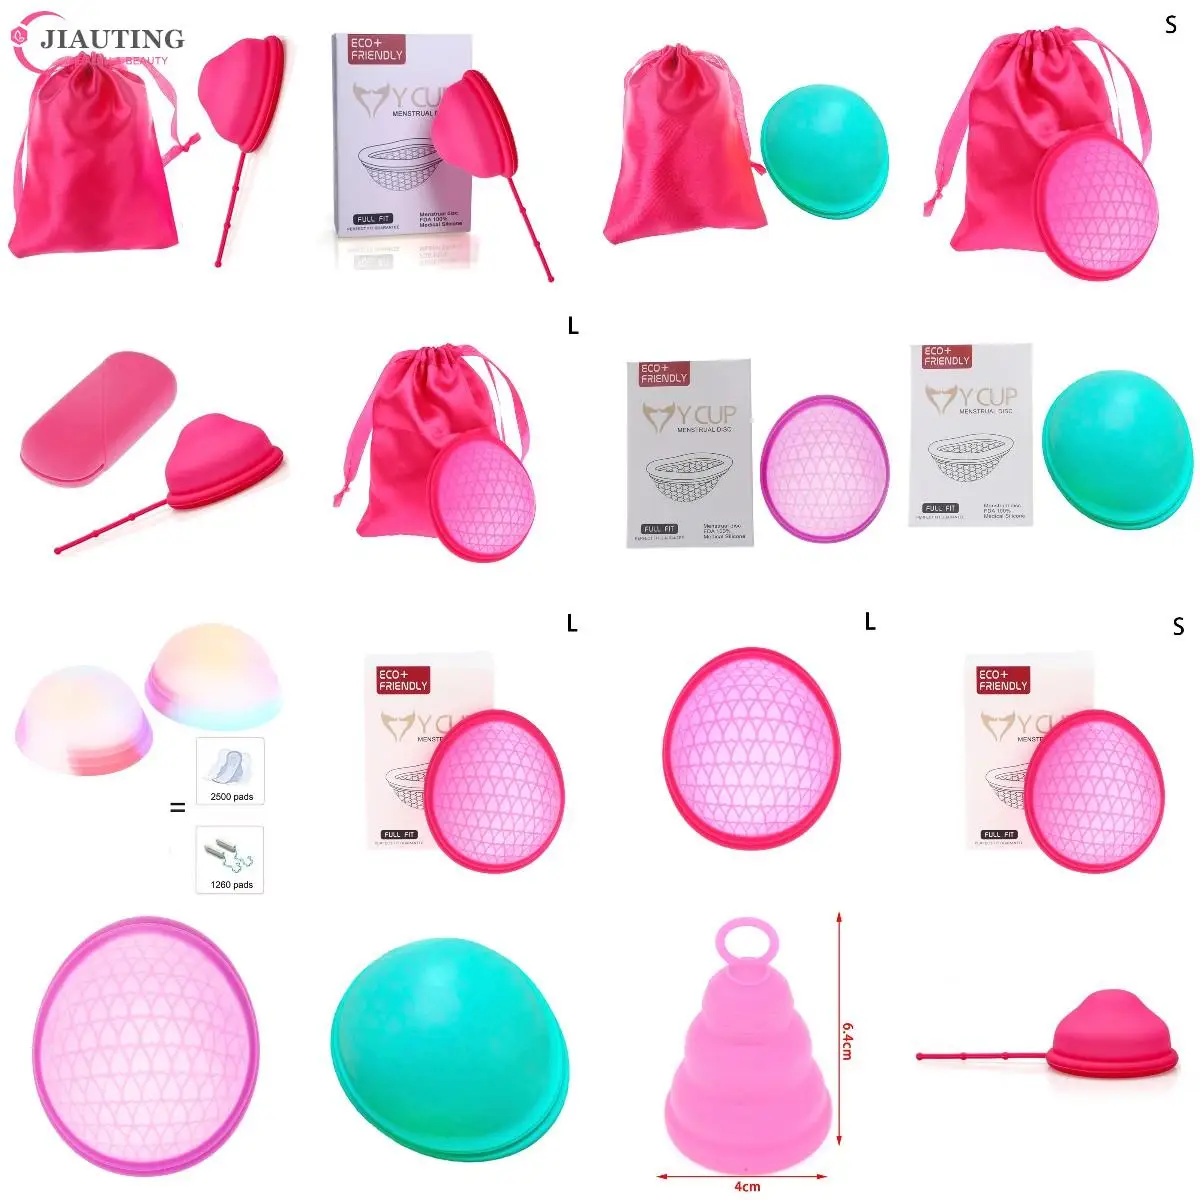 

1PCS Menstrual Disc With Flat-fit Design Extra-Thin Sterilizing Silicone Menstrual Cup Period Copa With Silicone Case For Women